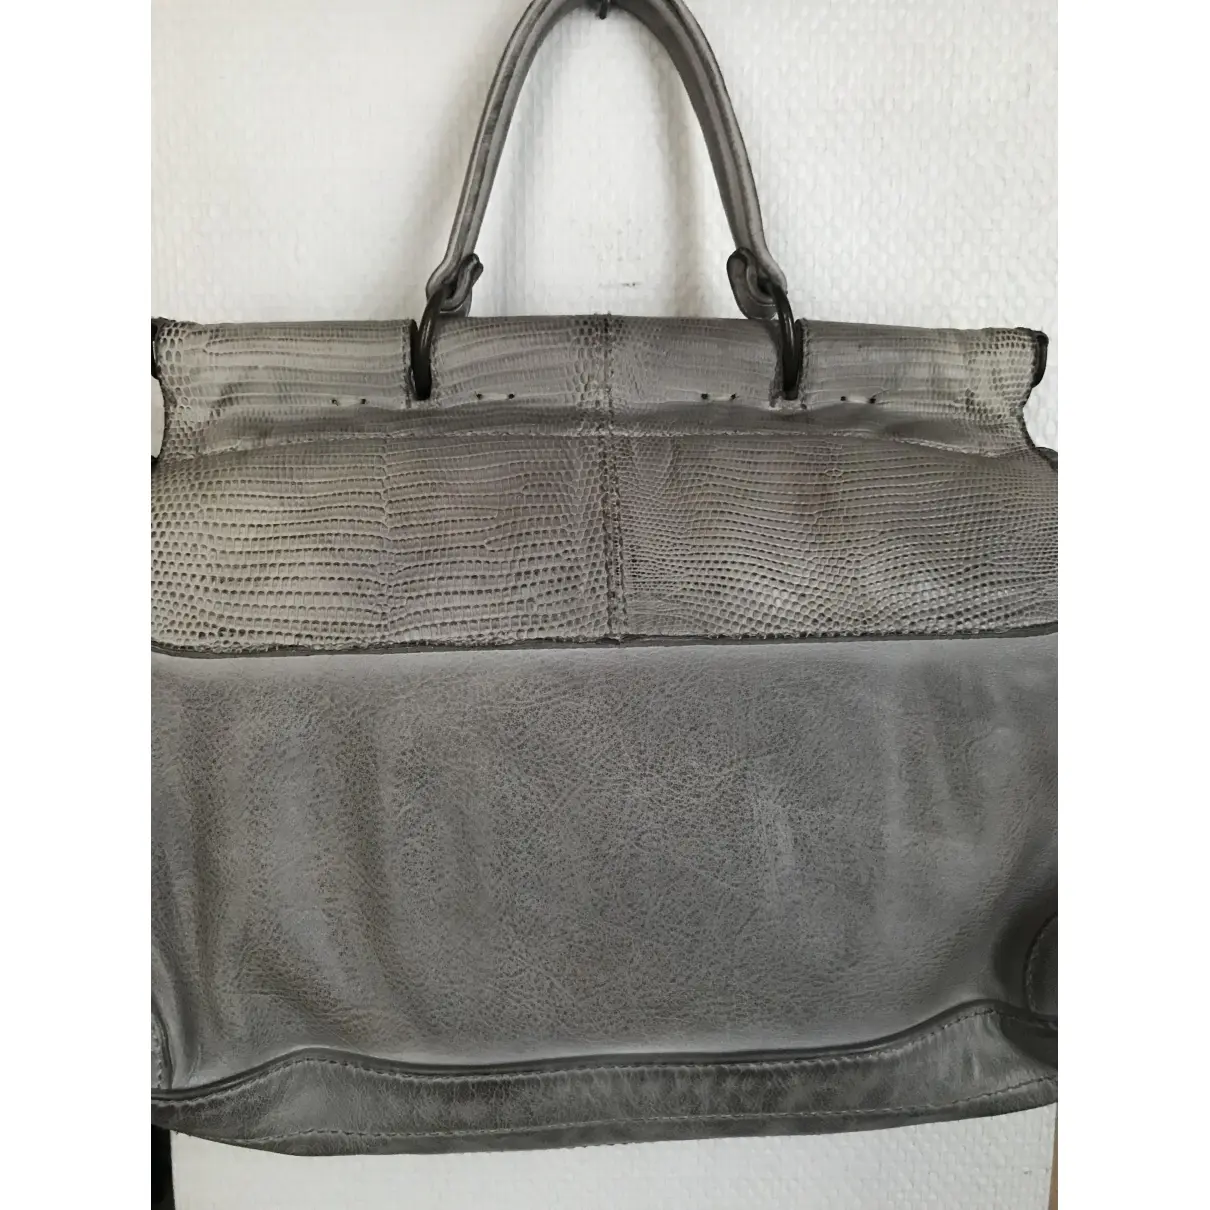 Reptile's House Leather handbag for sale